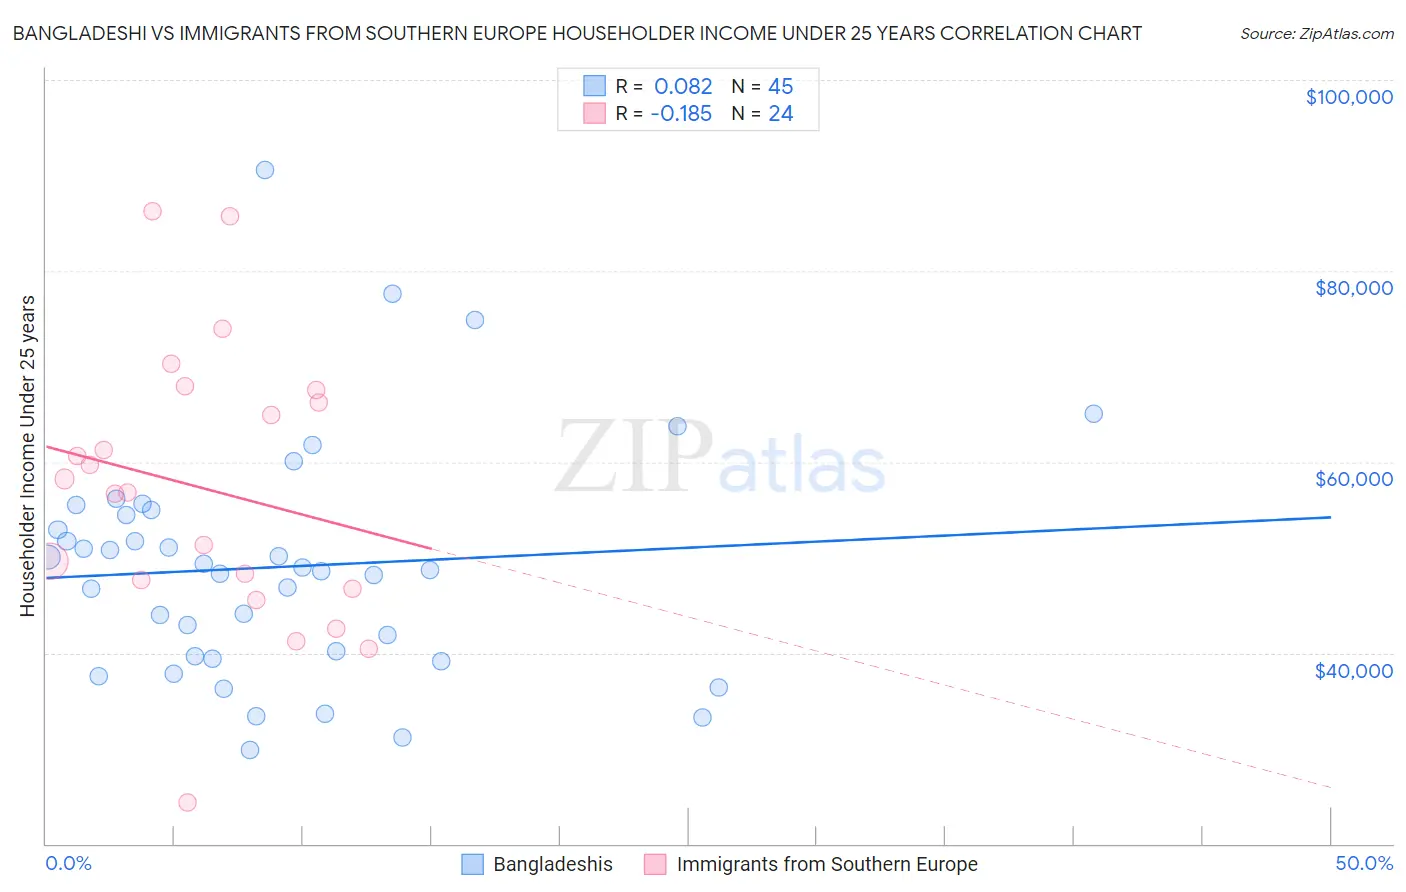 Bangladeshi vs Immigrants from Southern Europe Householder Income Under 25 years